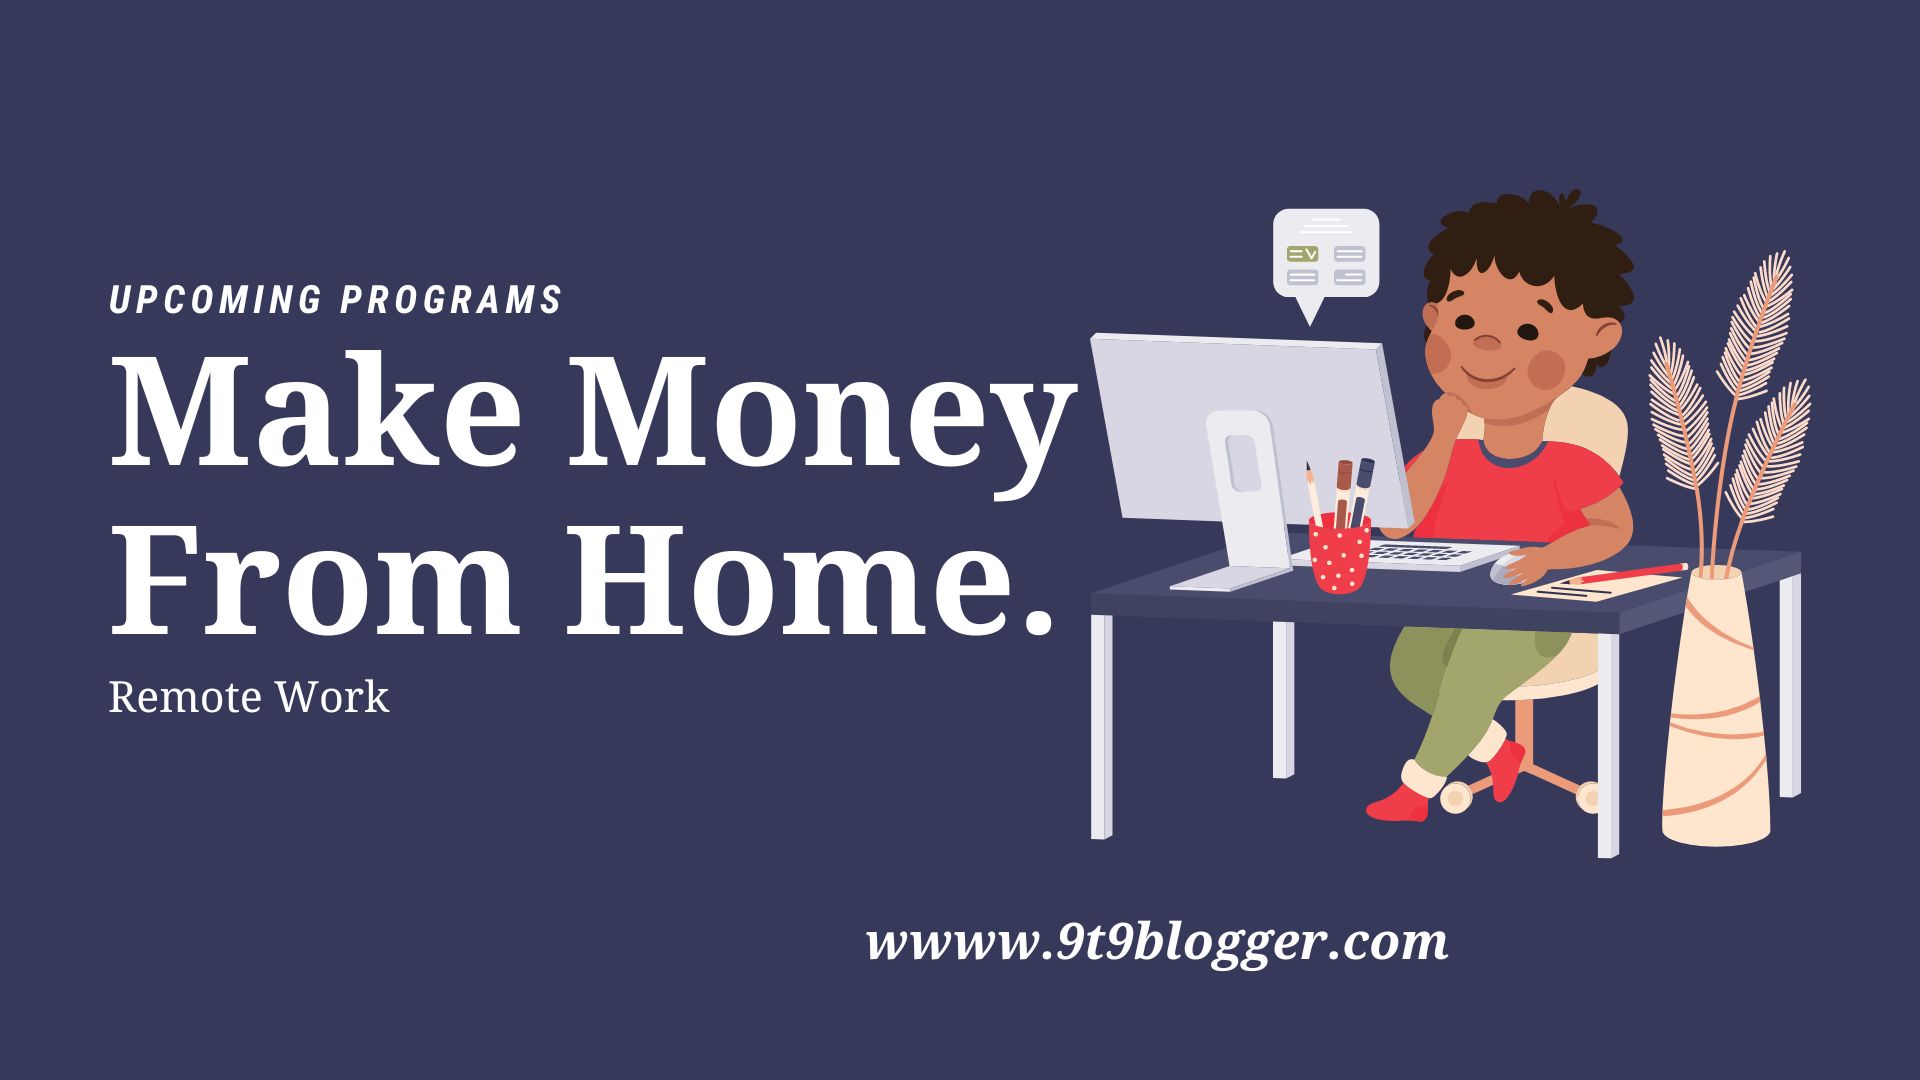 Tips to Make Money from Home through Remote Work